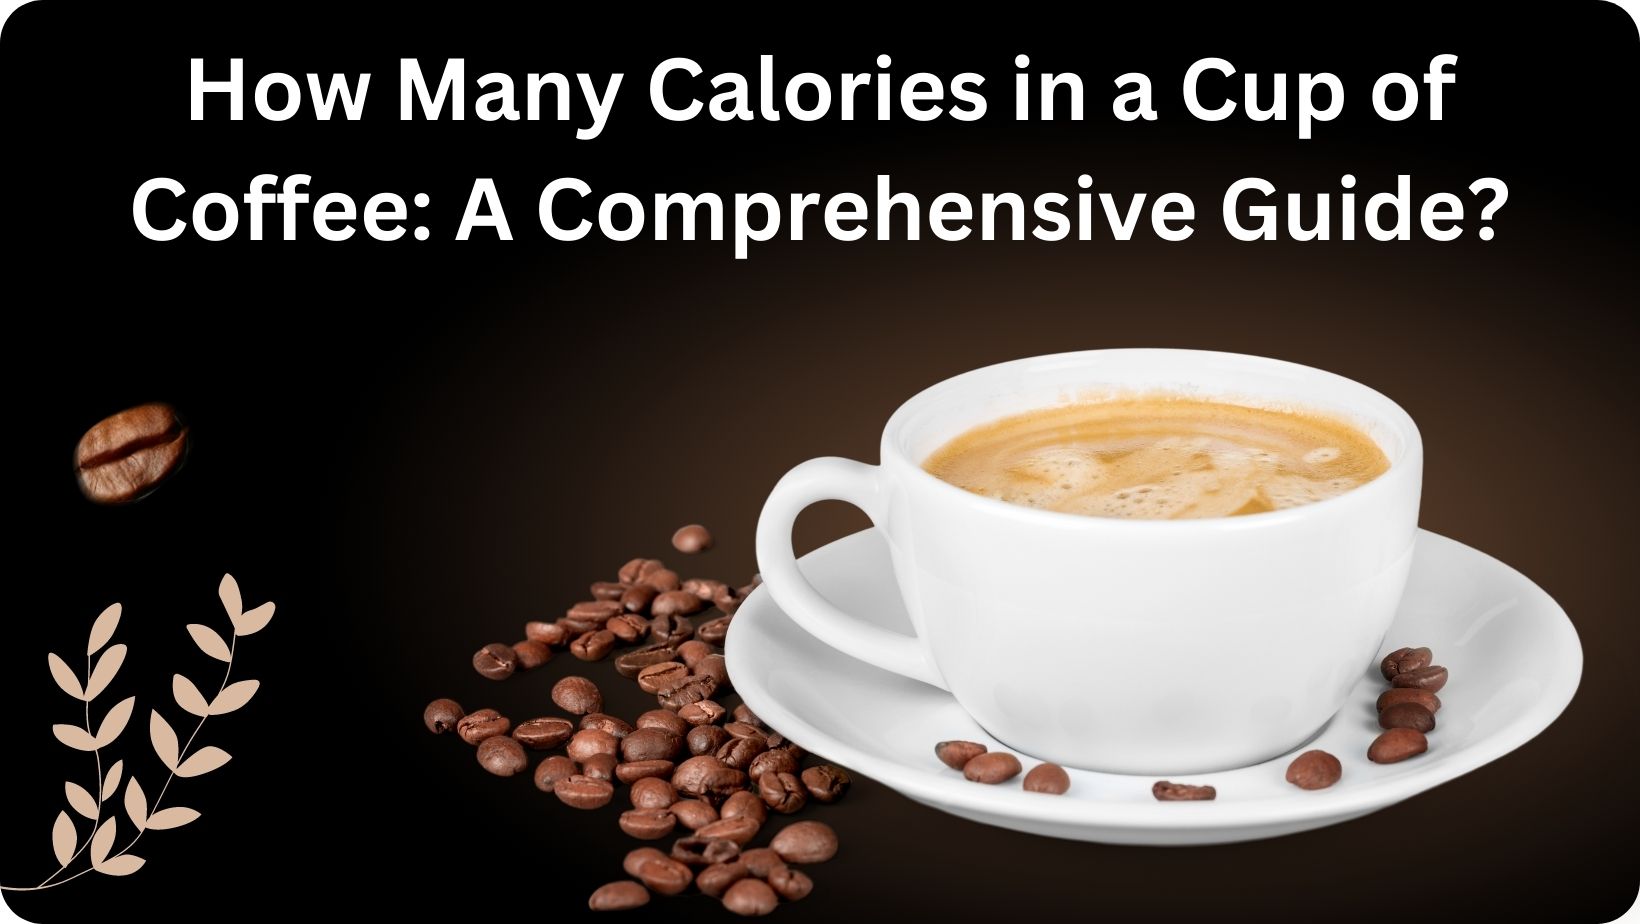 How Many Calories in a Cup of Coffee: A Comprehensive Guide?